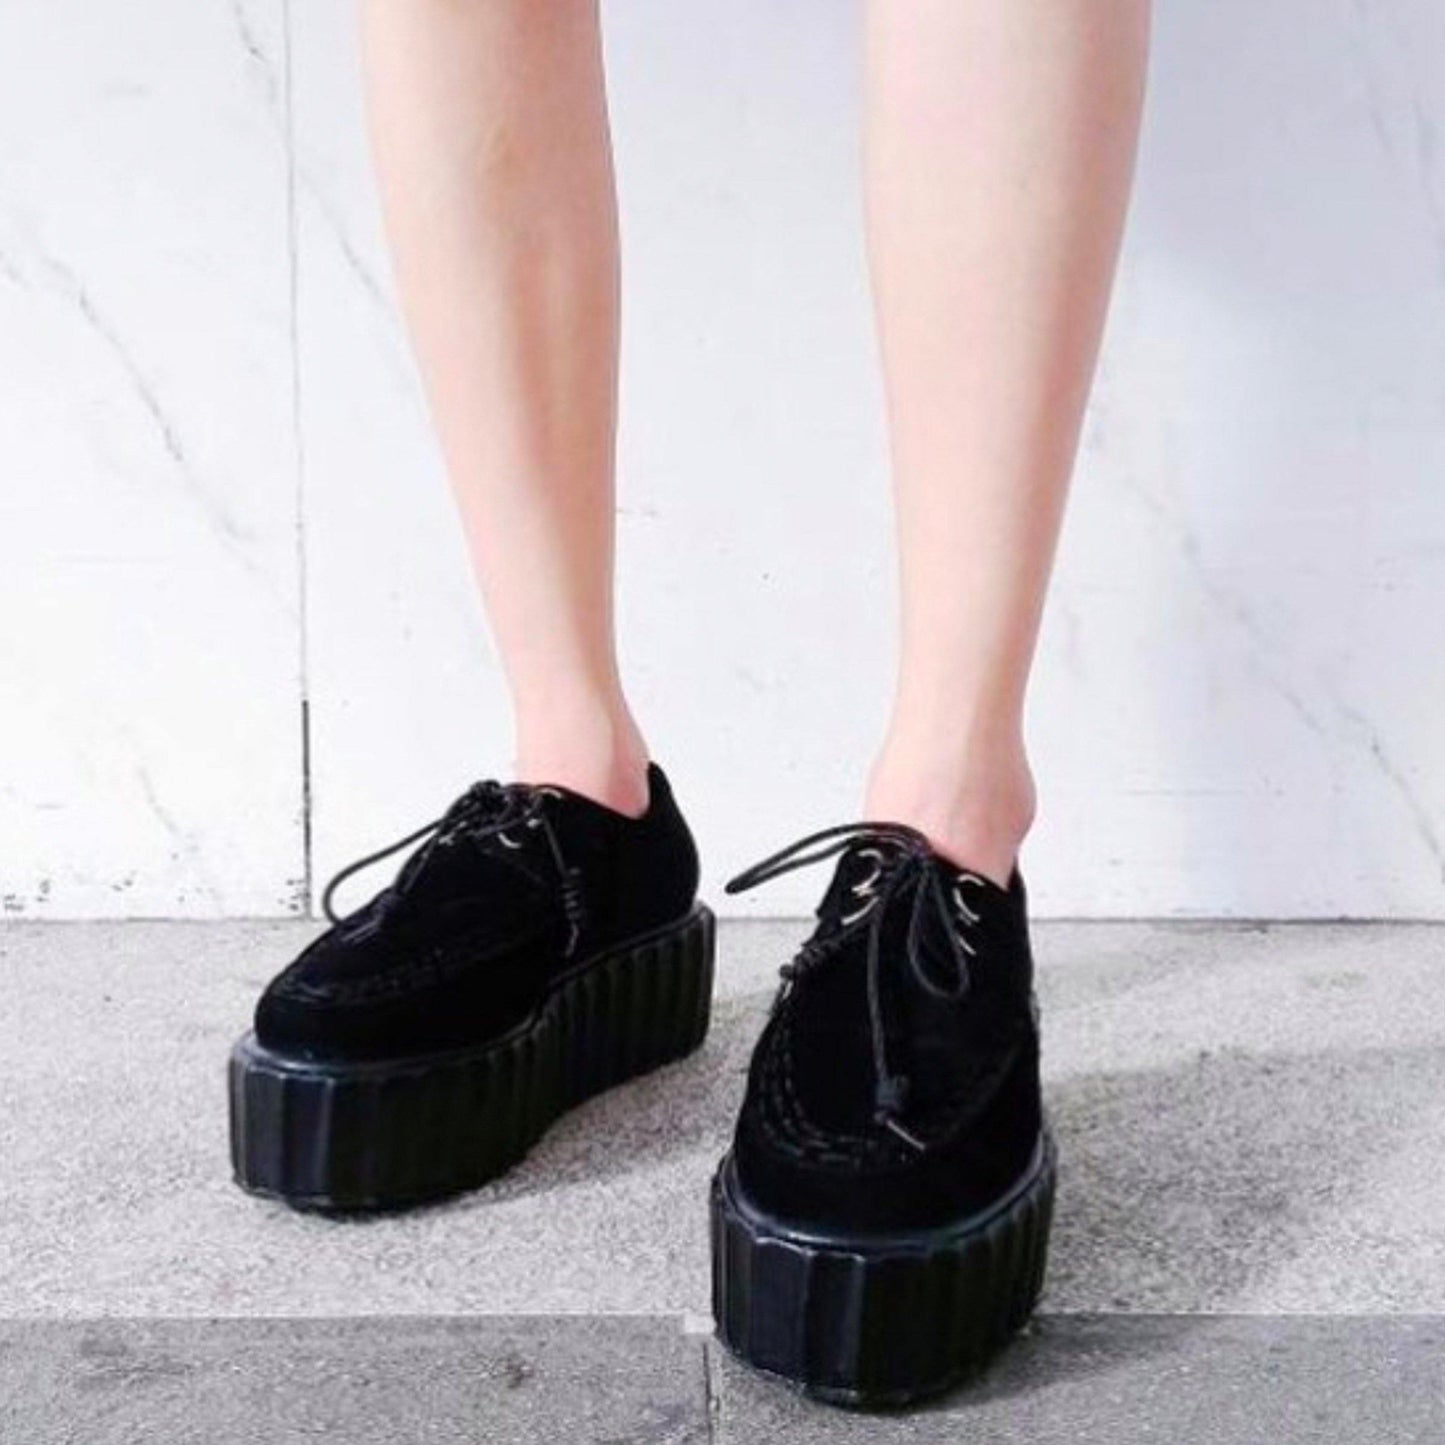 Creepers - Risque Manufacturing